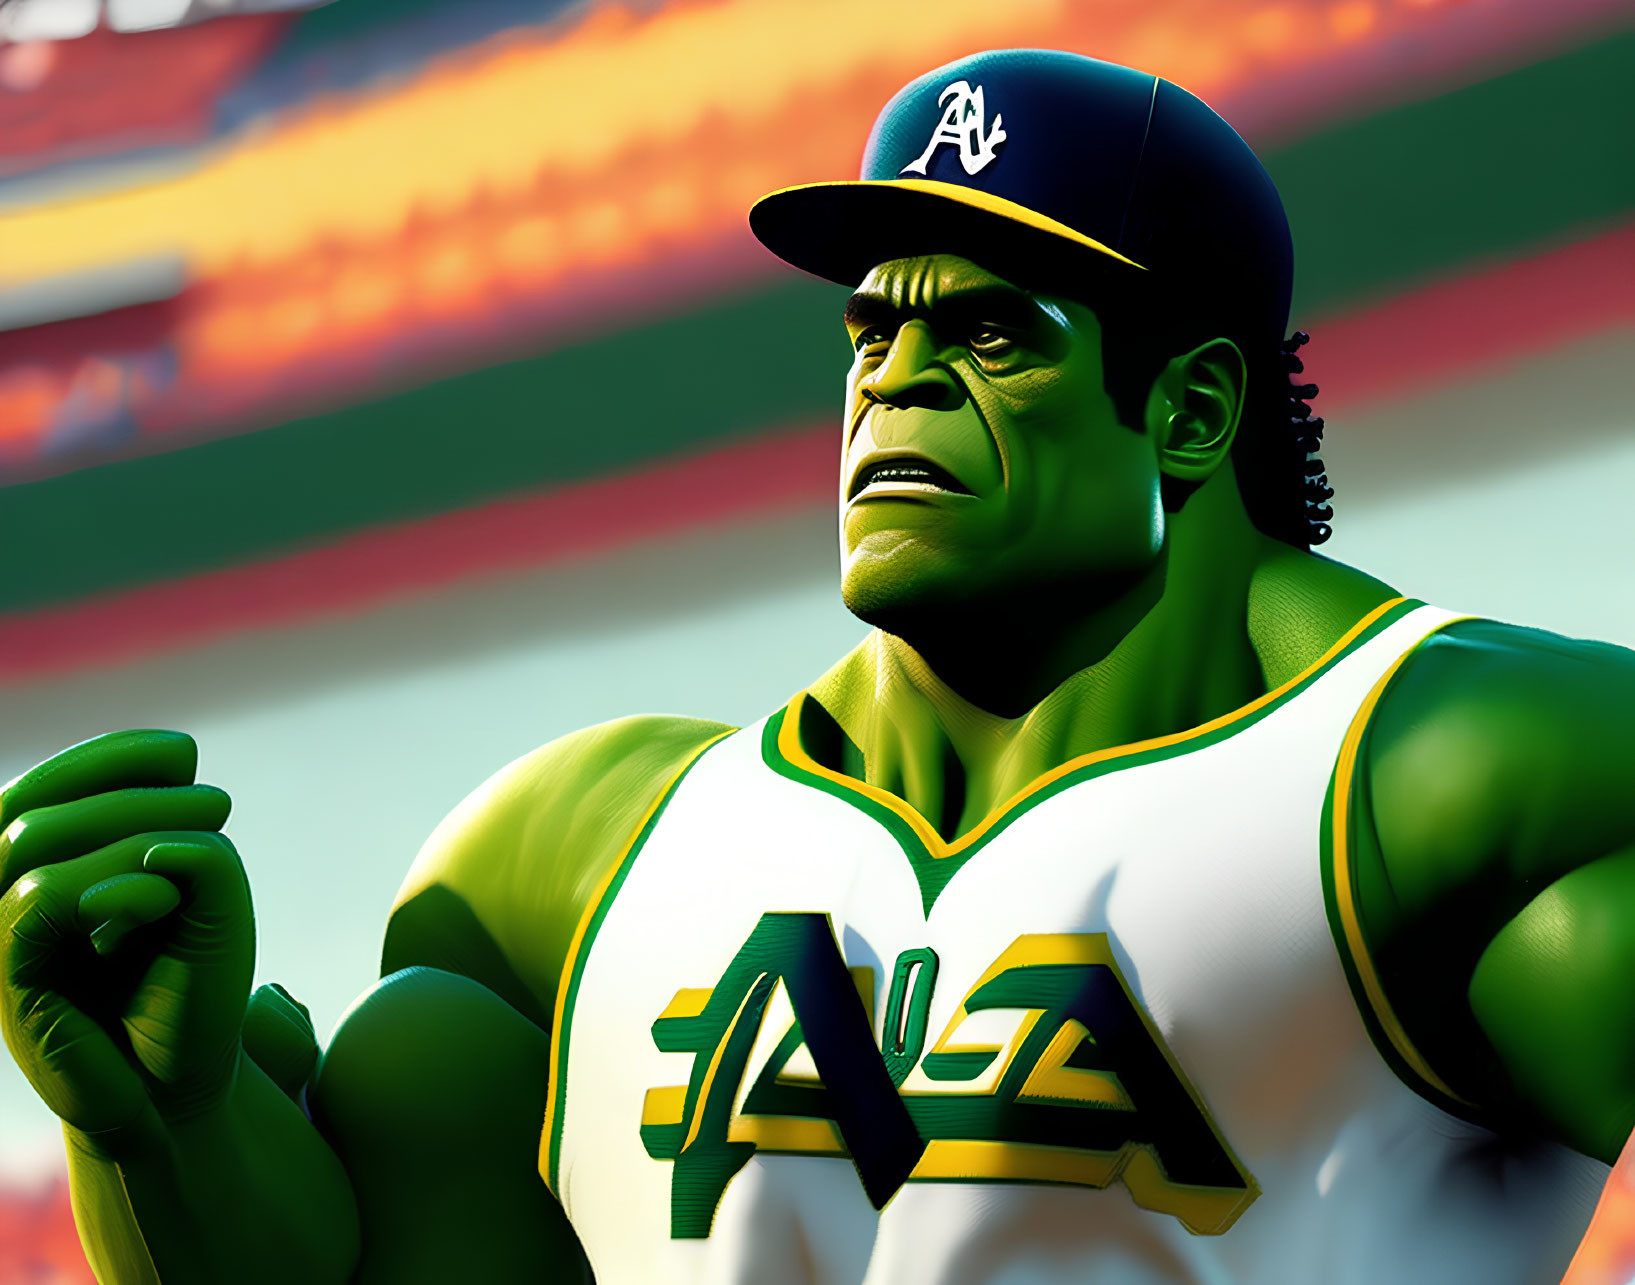 Stylized Hulk in green and yellow baseball outfit on vibrant background